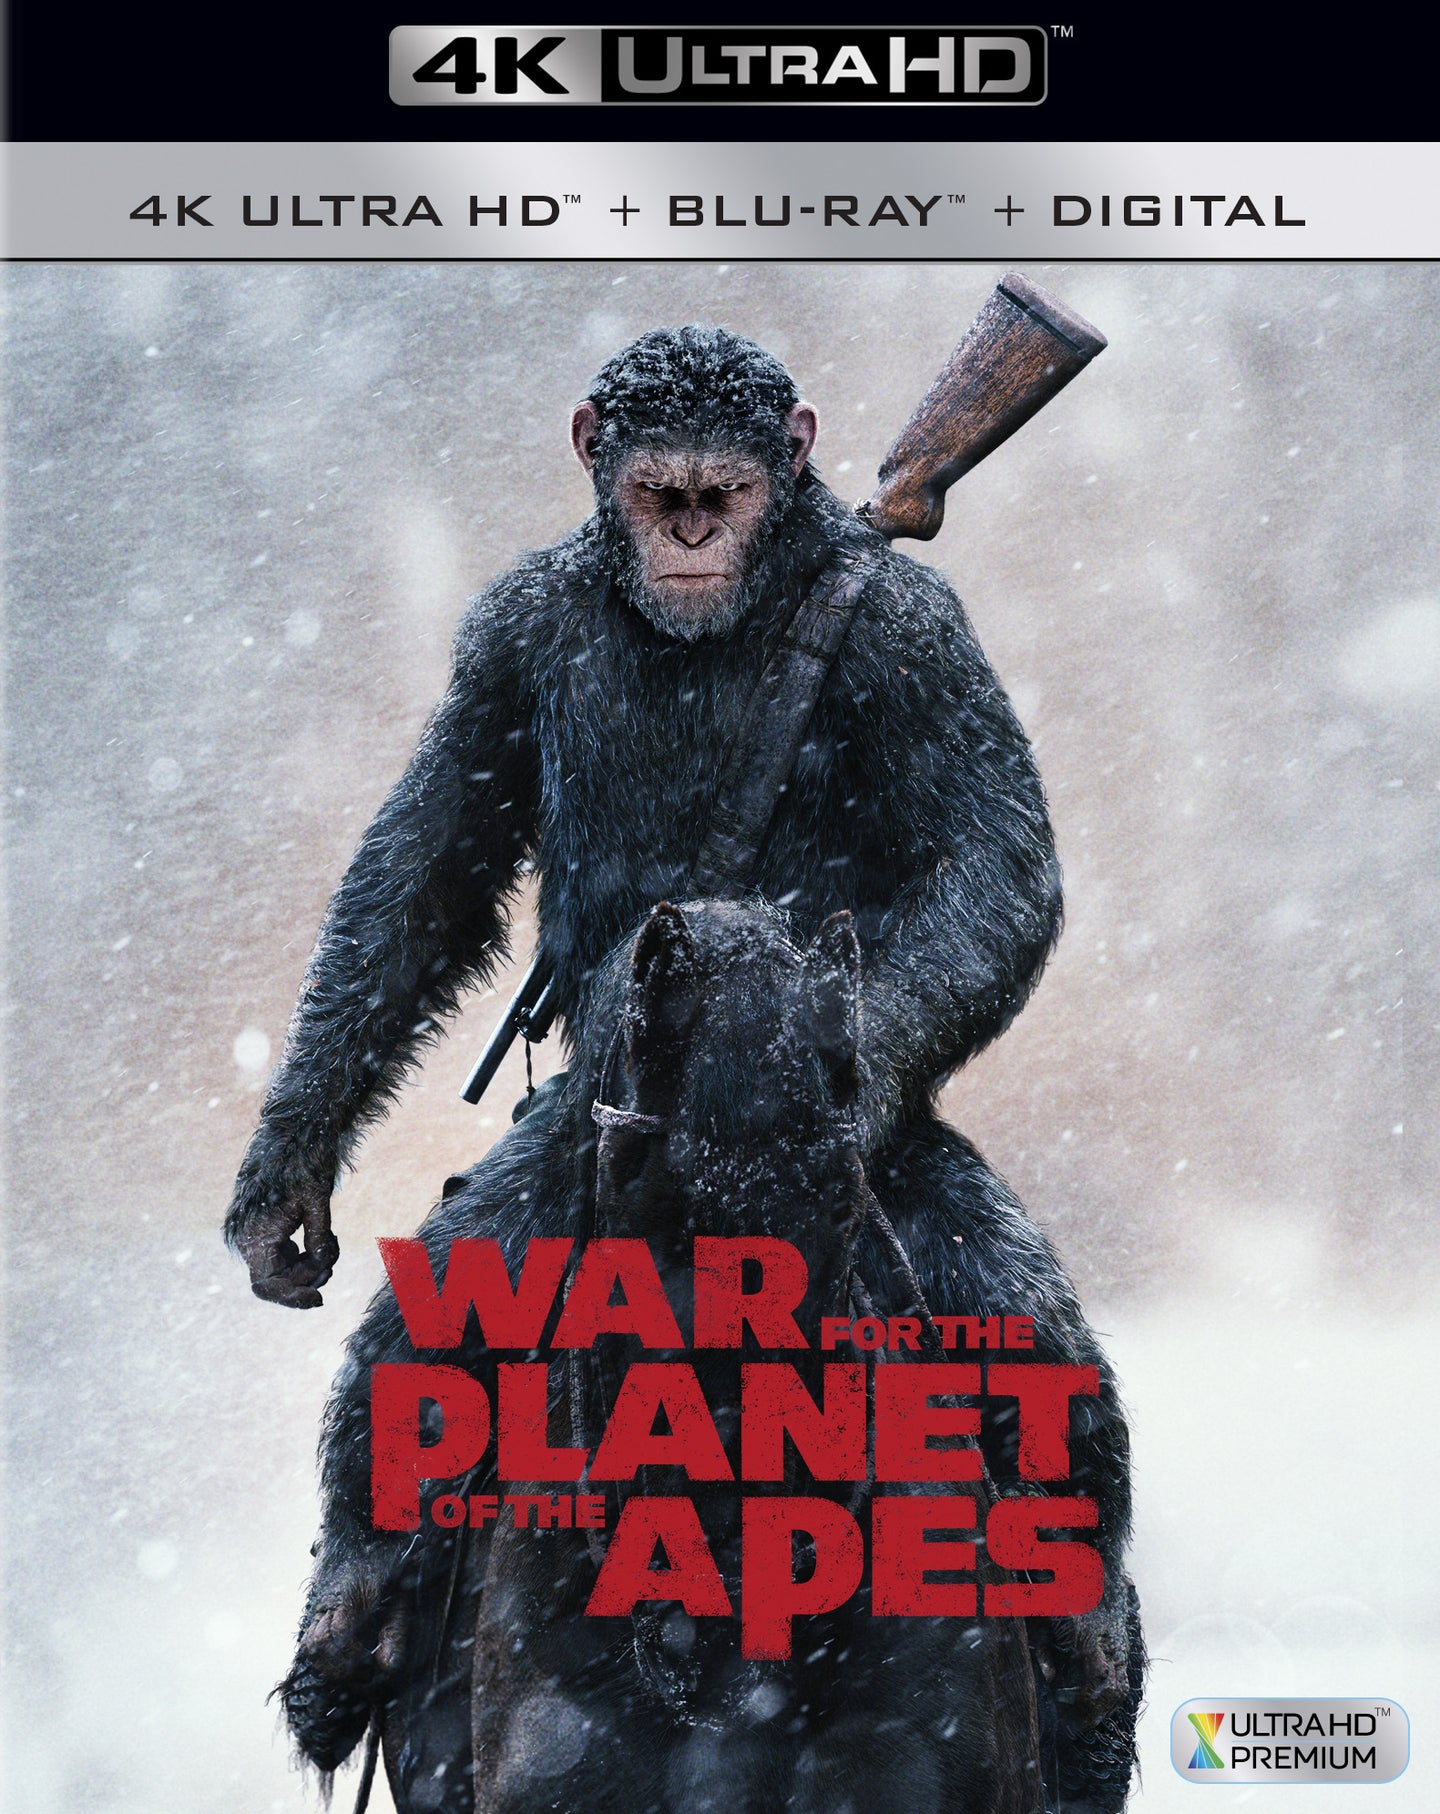 War for the Planet of the Apes (2017: Ports Via MA) iTunes 4K code